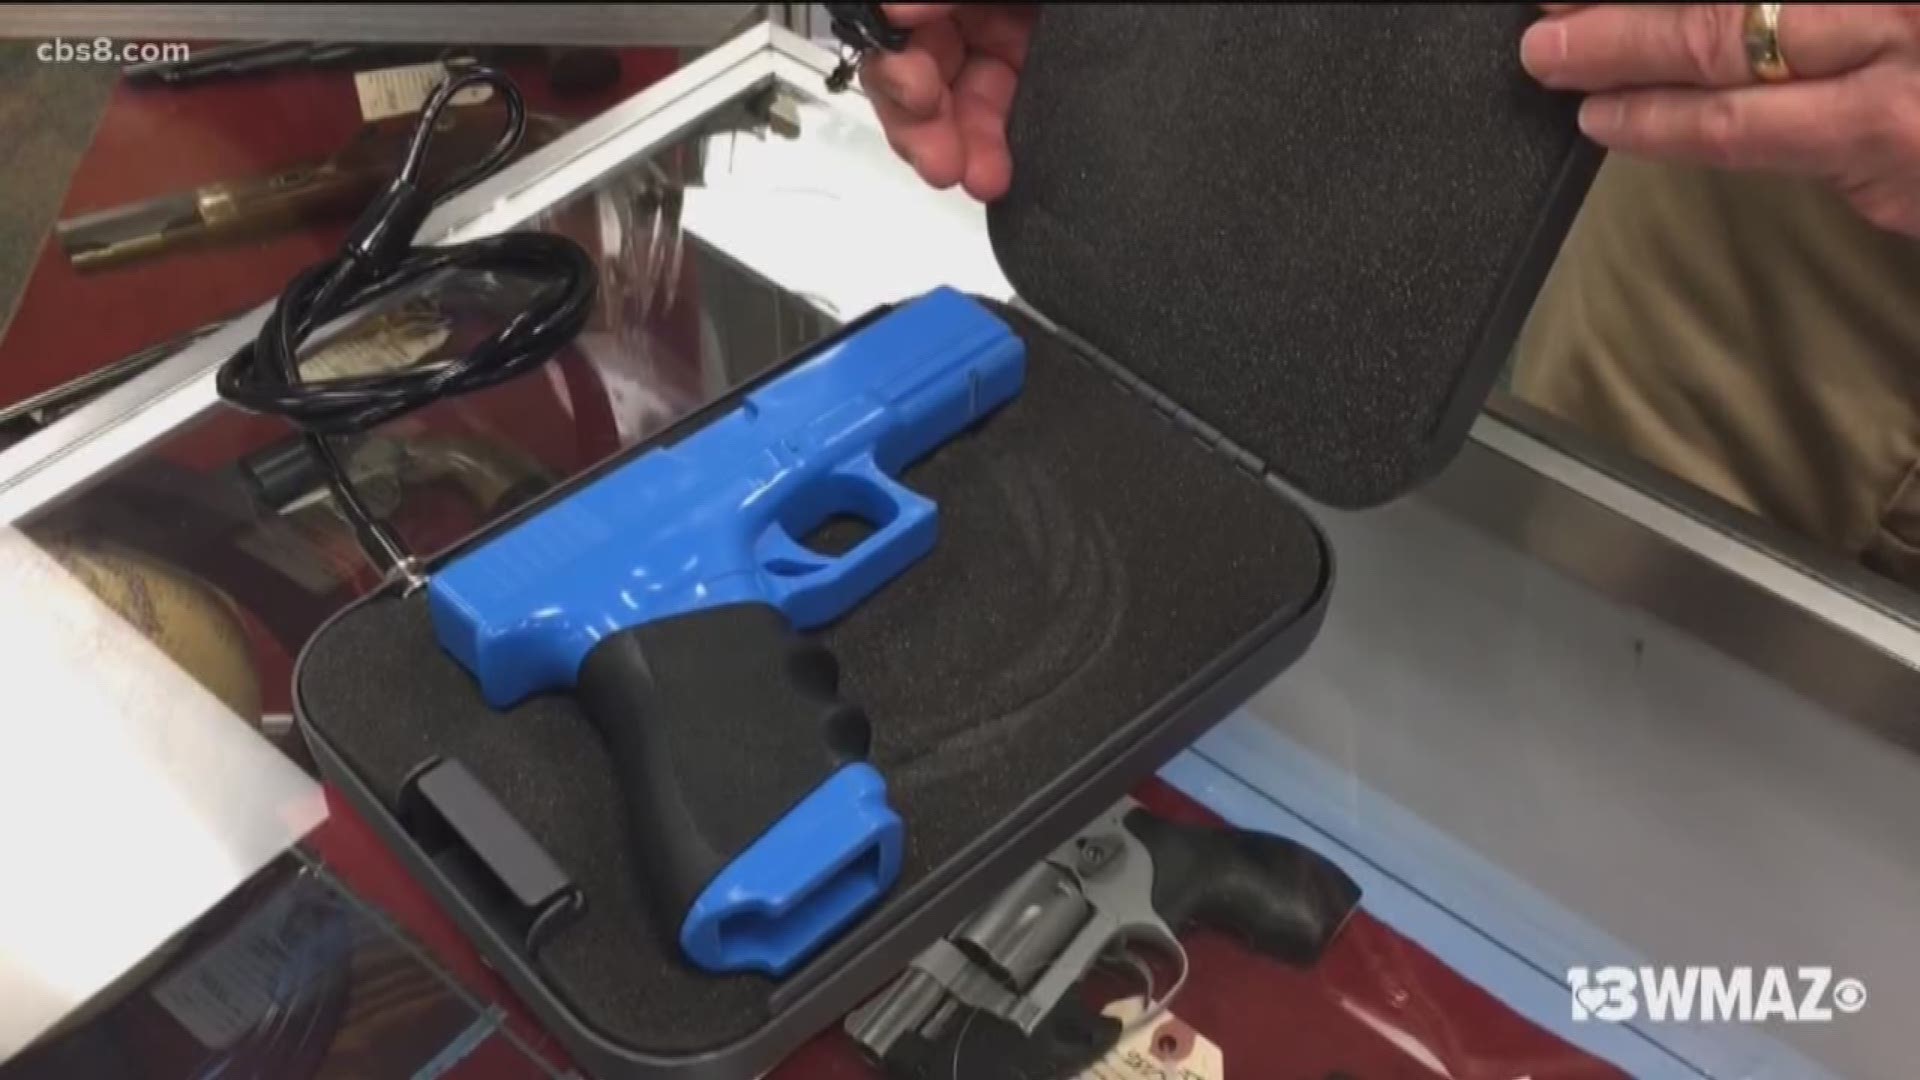 The San Diego City Council Monday tentatively approved an ordinance that would require gun owners to store guns in a locked container or disable them with a trigger lock when not in use or being worn on their person.